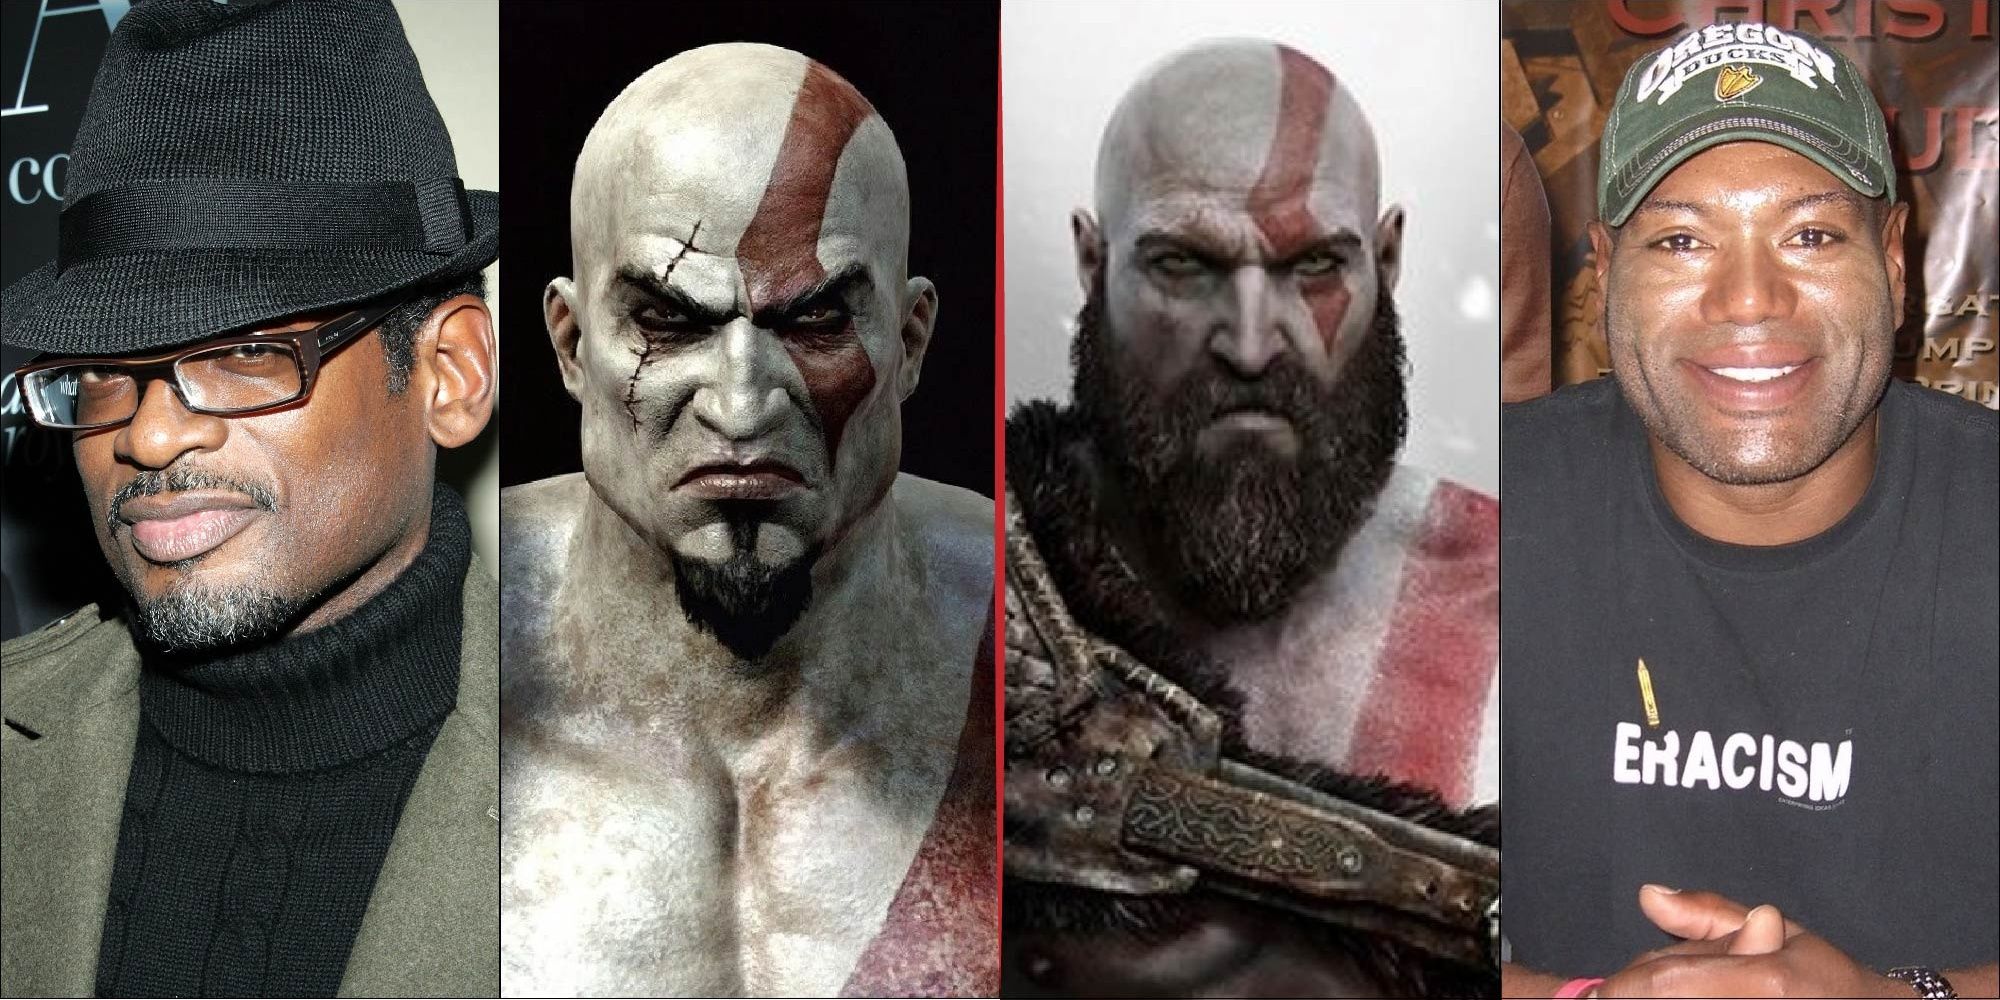 Kratos former voice actor TC Carson and current voice actor Christopher Judge, from the God of War Series